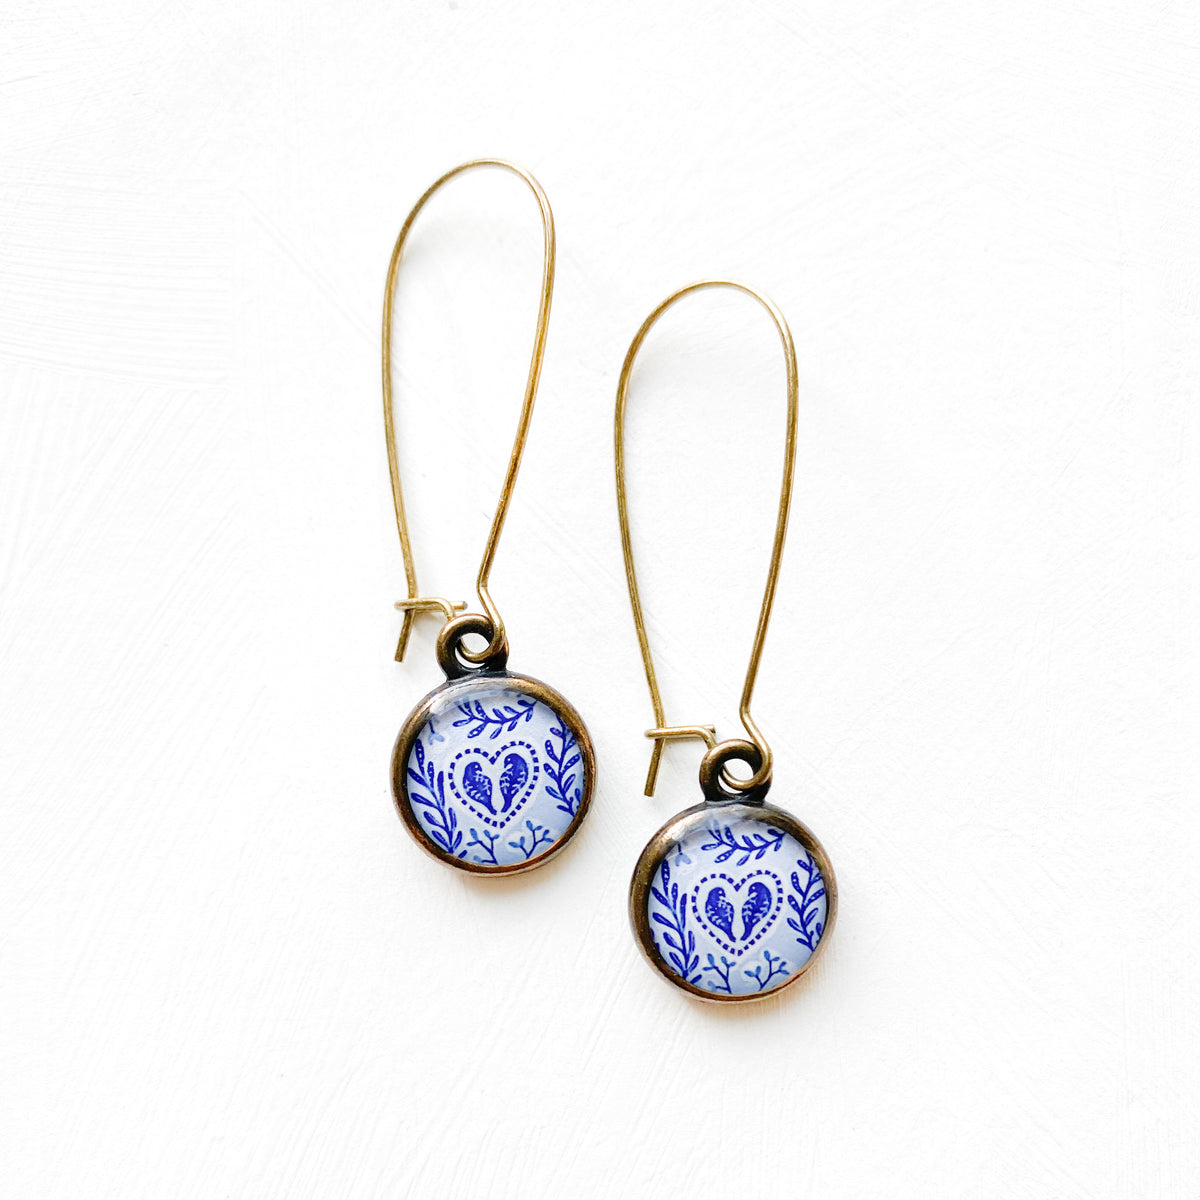 a pair of blue and white earrings on a white background